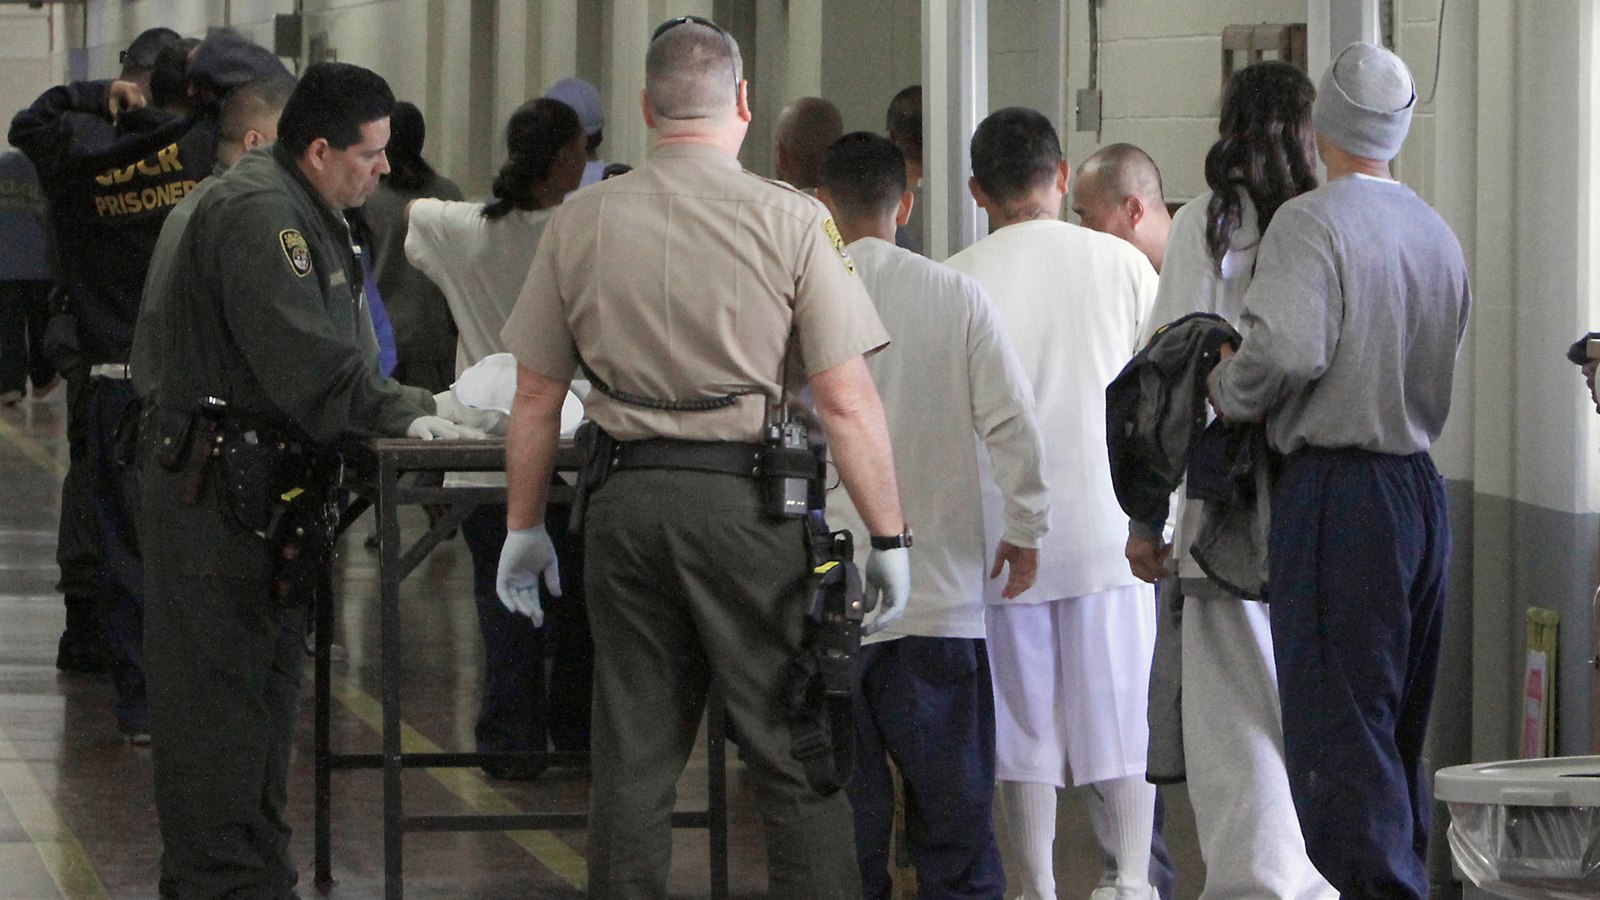 Riot At Calif State Prison Ends With 2 Inmates Stabbed